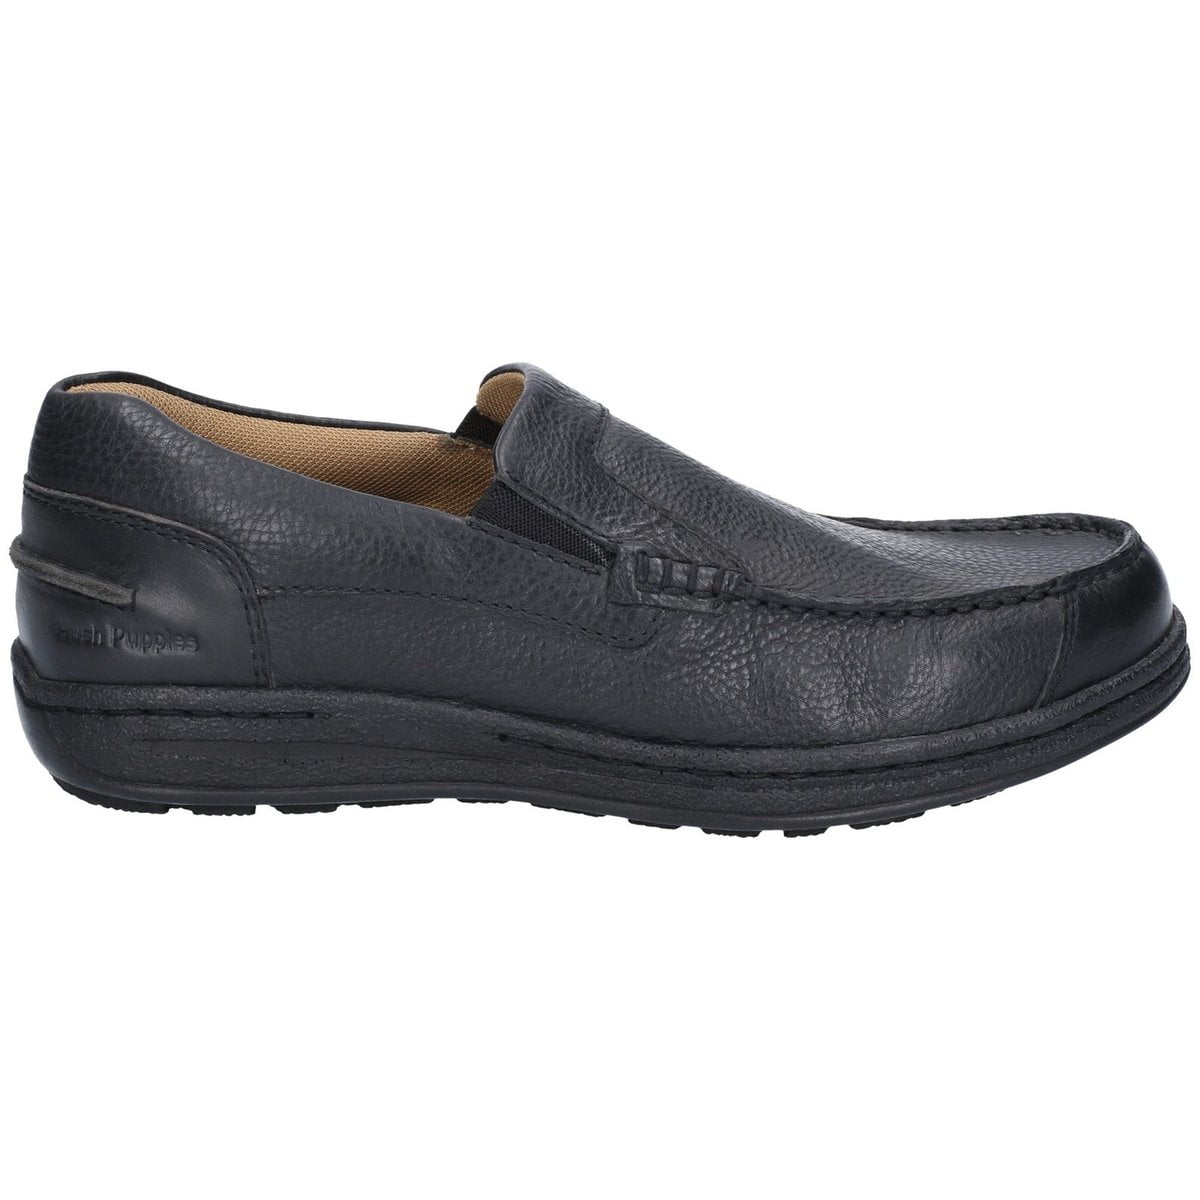 Hush Puppies MURPHY VICTORY Mens Casual Formal Comfort Leather Slip On Shoes